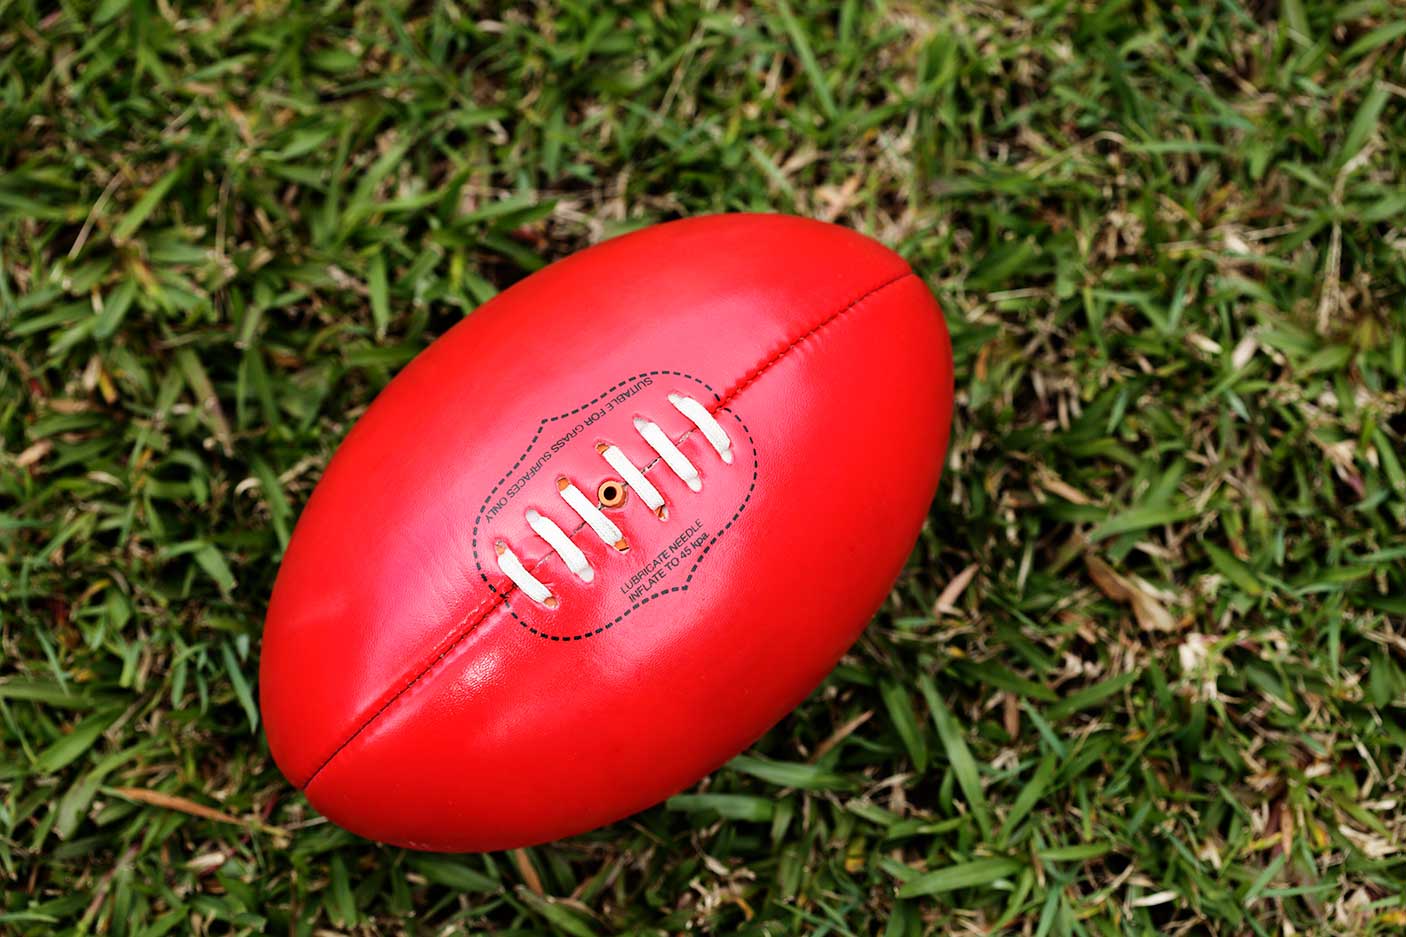 A football laying on grass